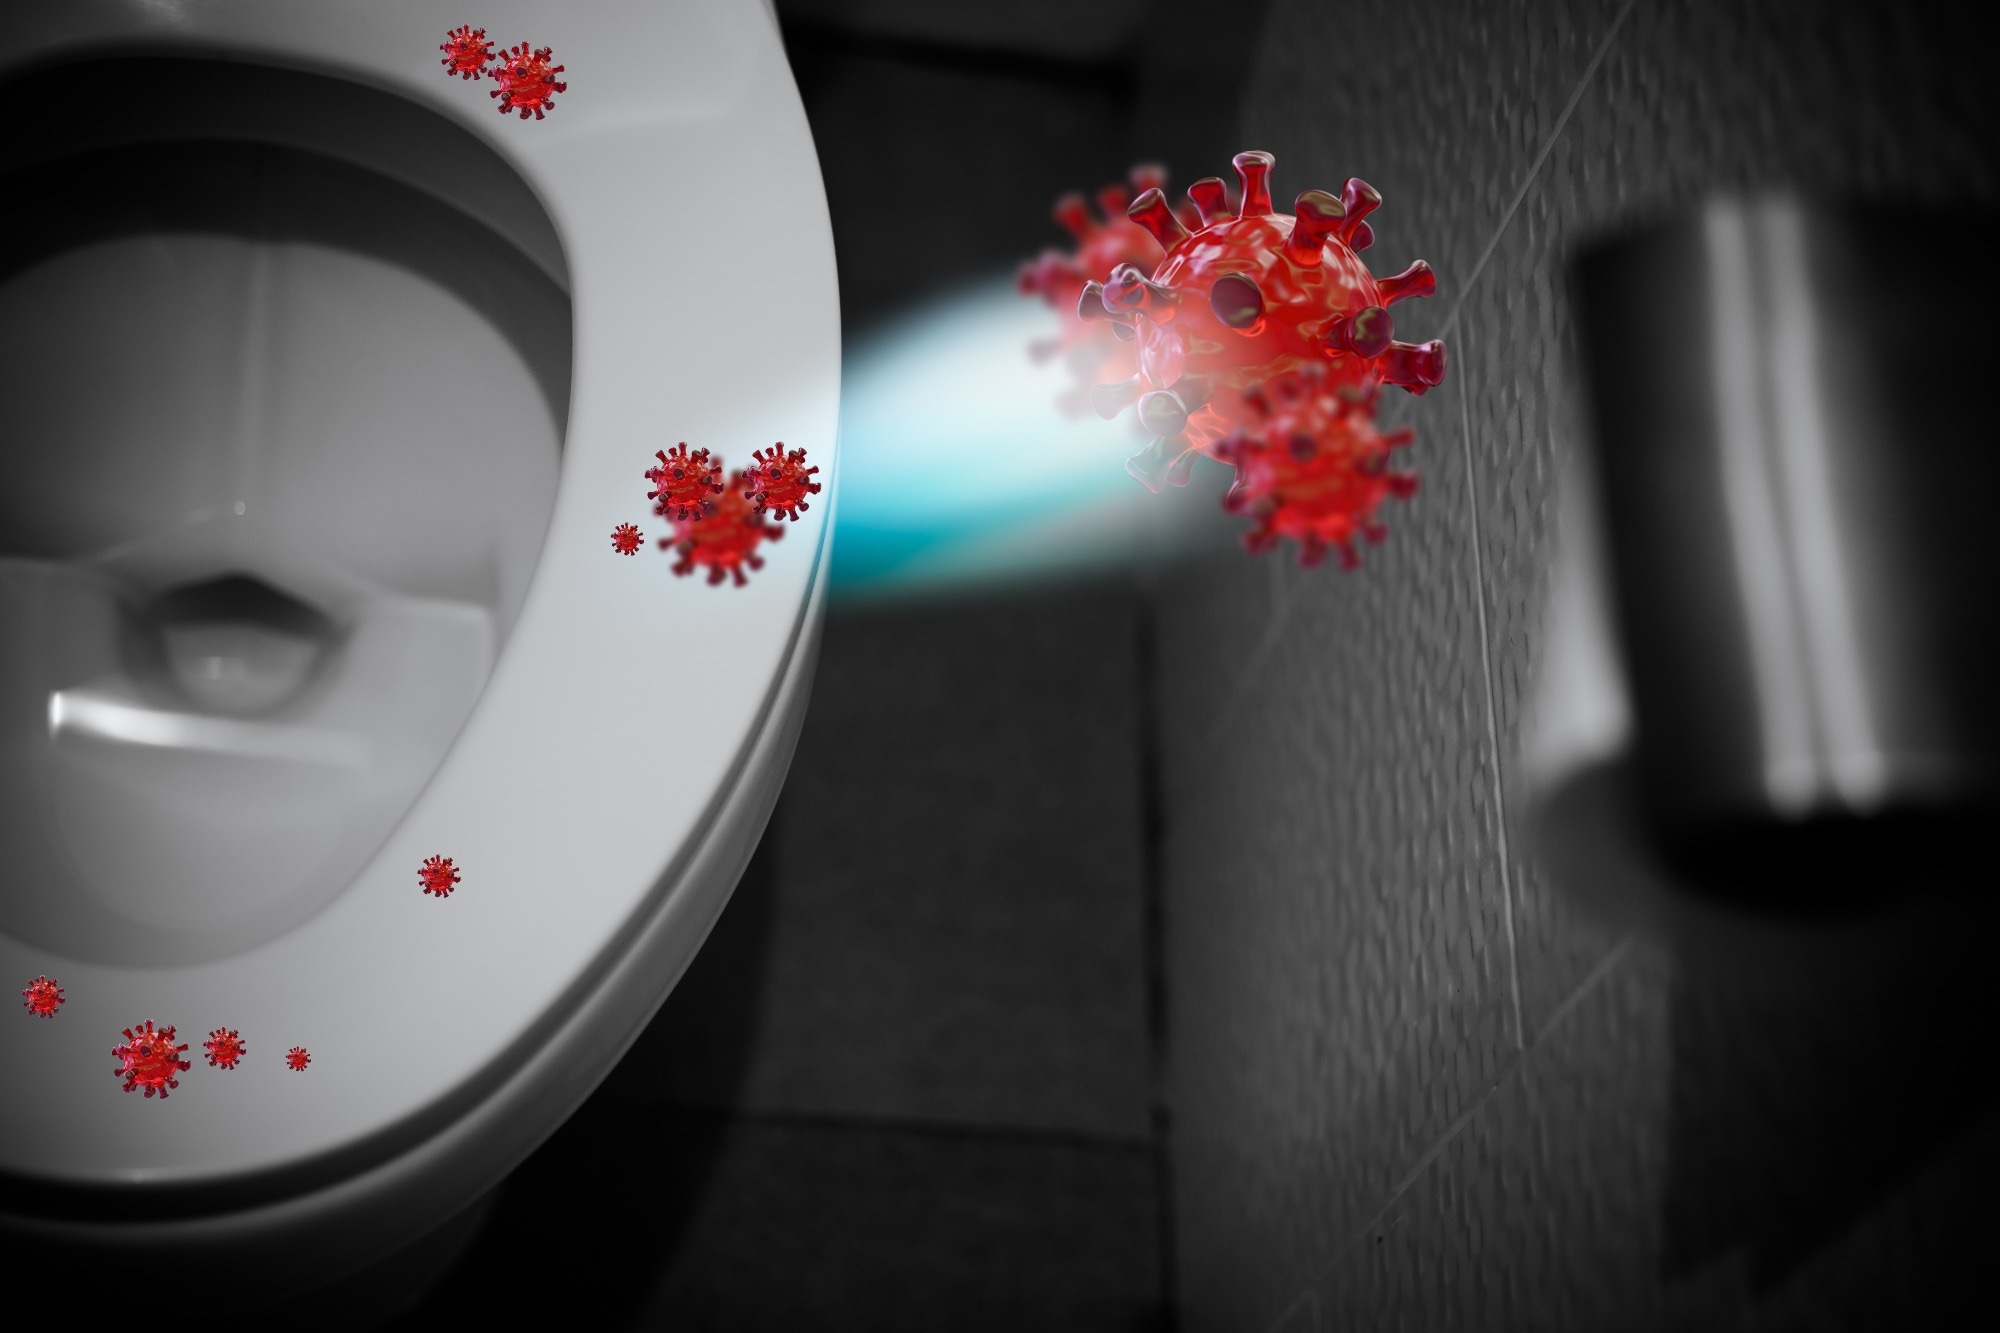 Study: Impacts of lid closure during toilet flushing and of toilet bowl cleaning on viral contamination of surfaces in United States restrooms. Image Credit: MIA Studio / Shutterstock